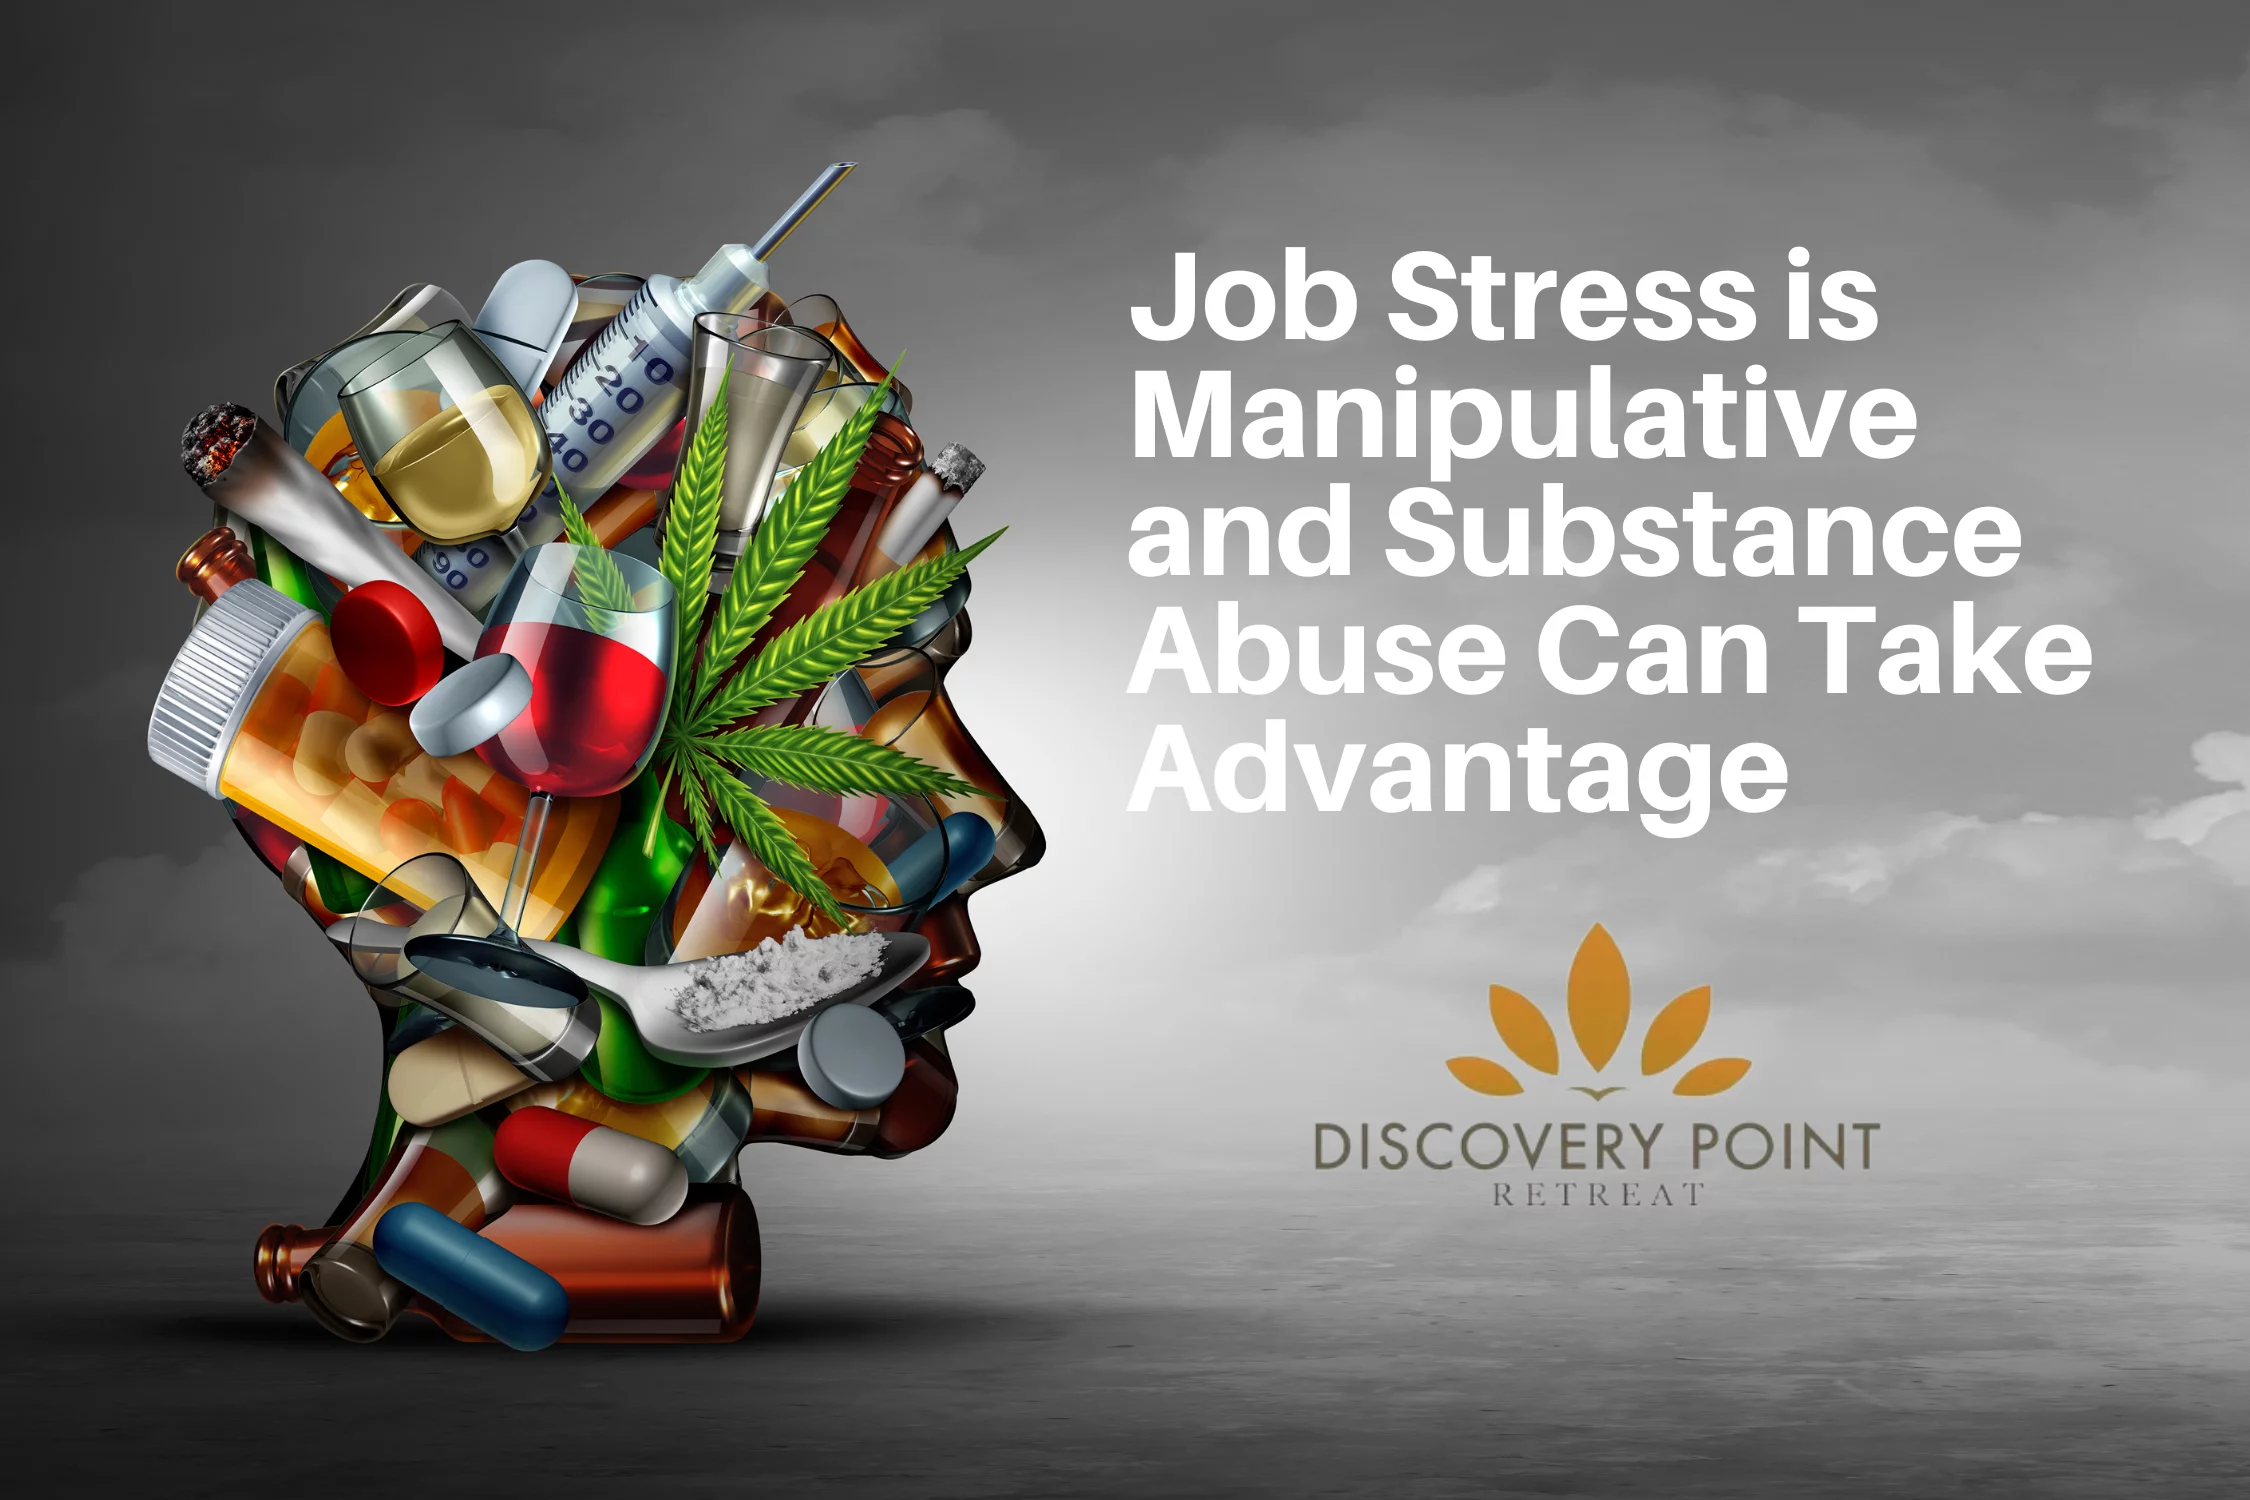 Work stress and substance abuse